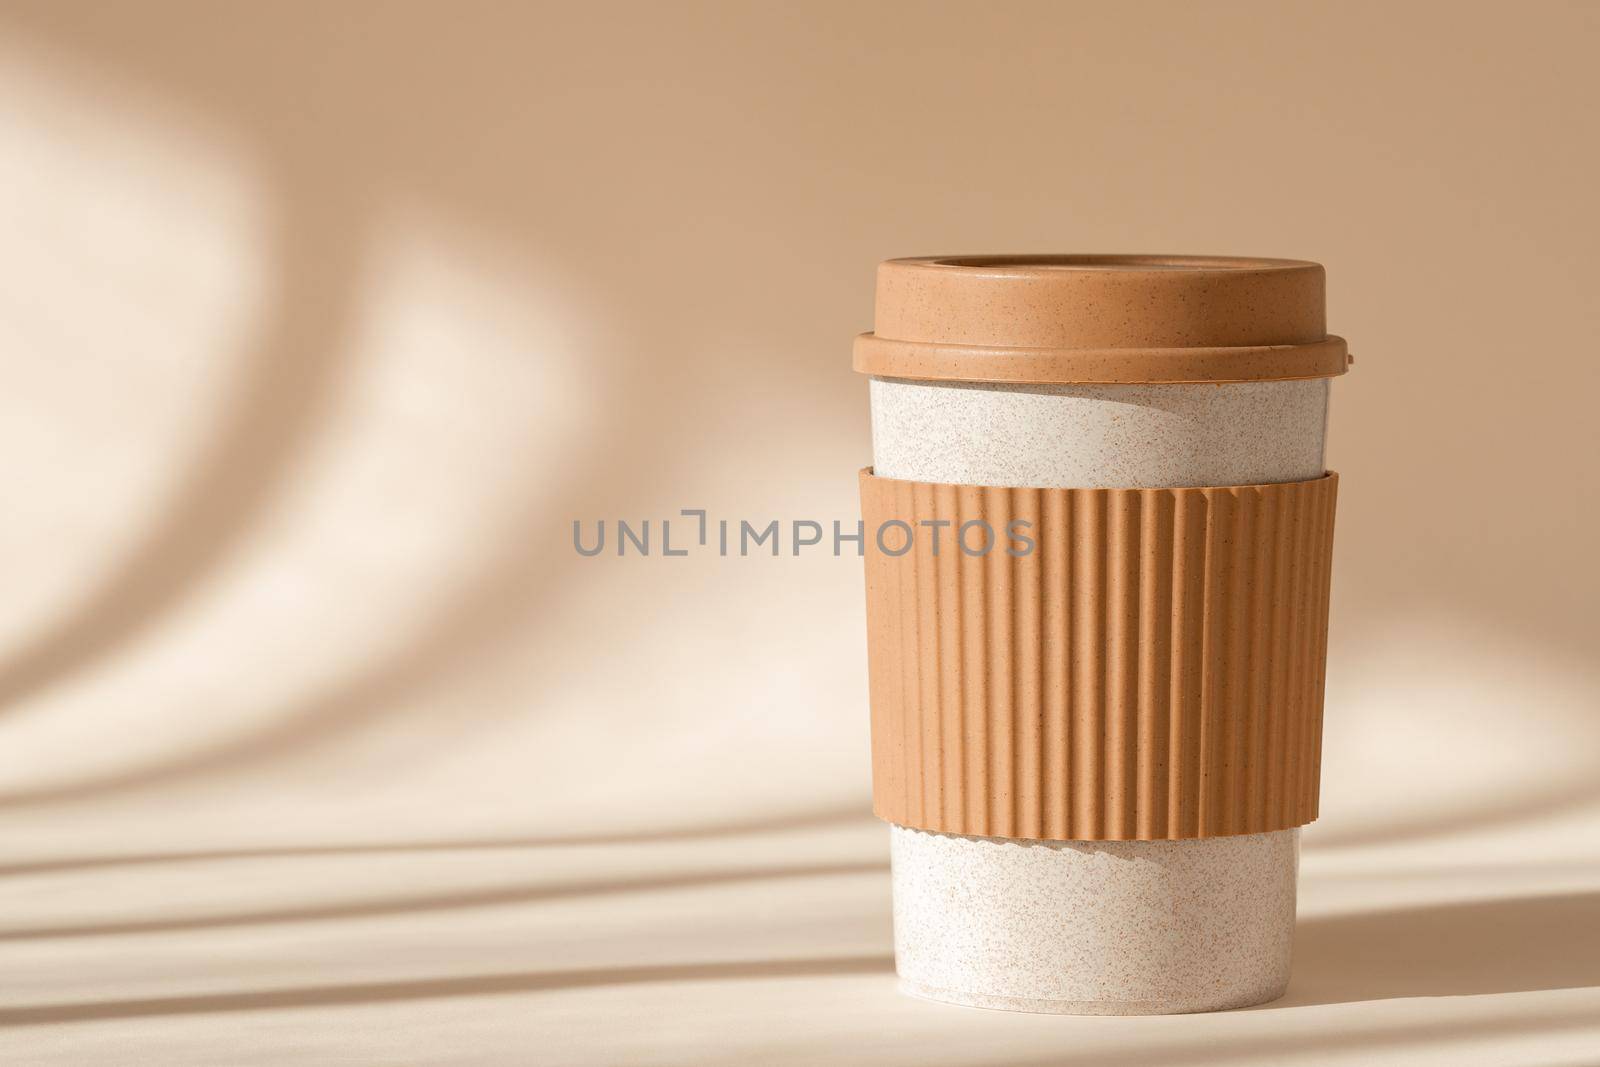 Reusable cup, biodegradable travel plastic coffee mug for take away. Sustainable bamboo eco friendly cup with silicone holder on natural shadow beige background. Zero waste, sustainability concept.